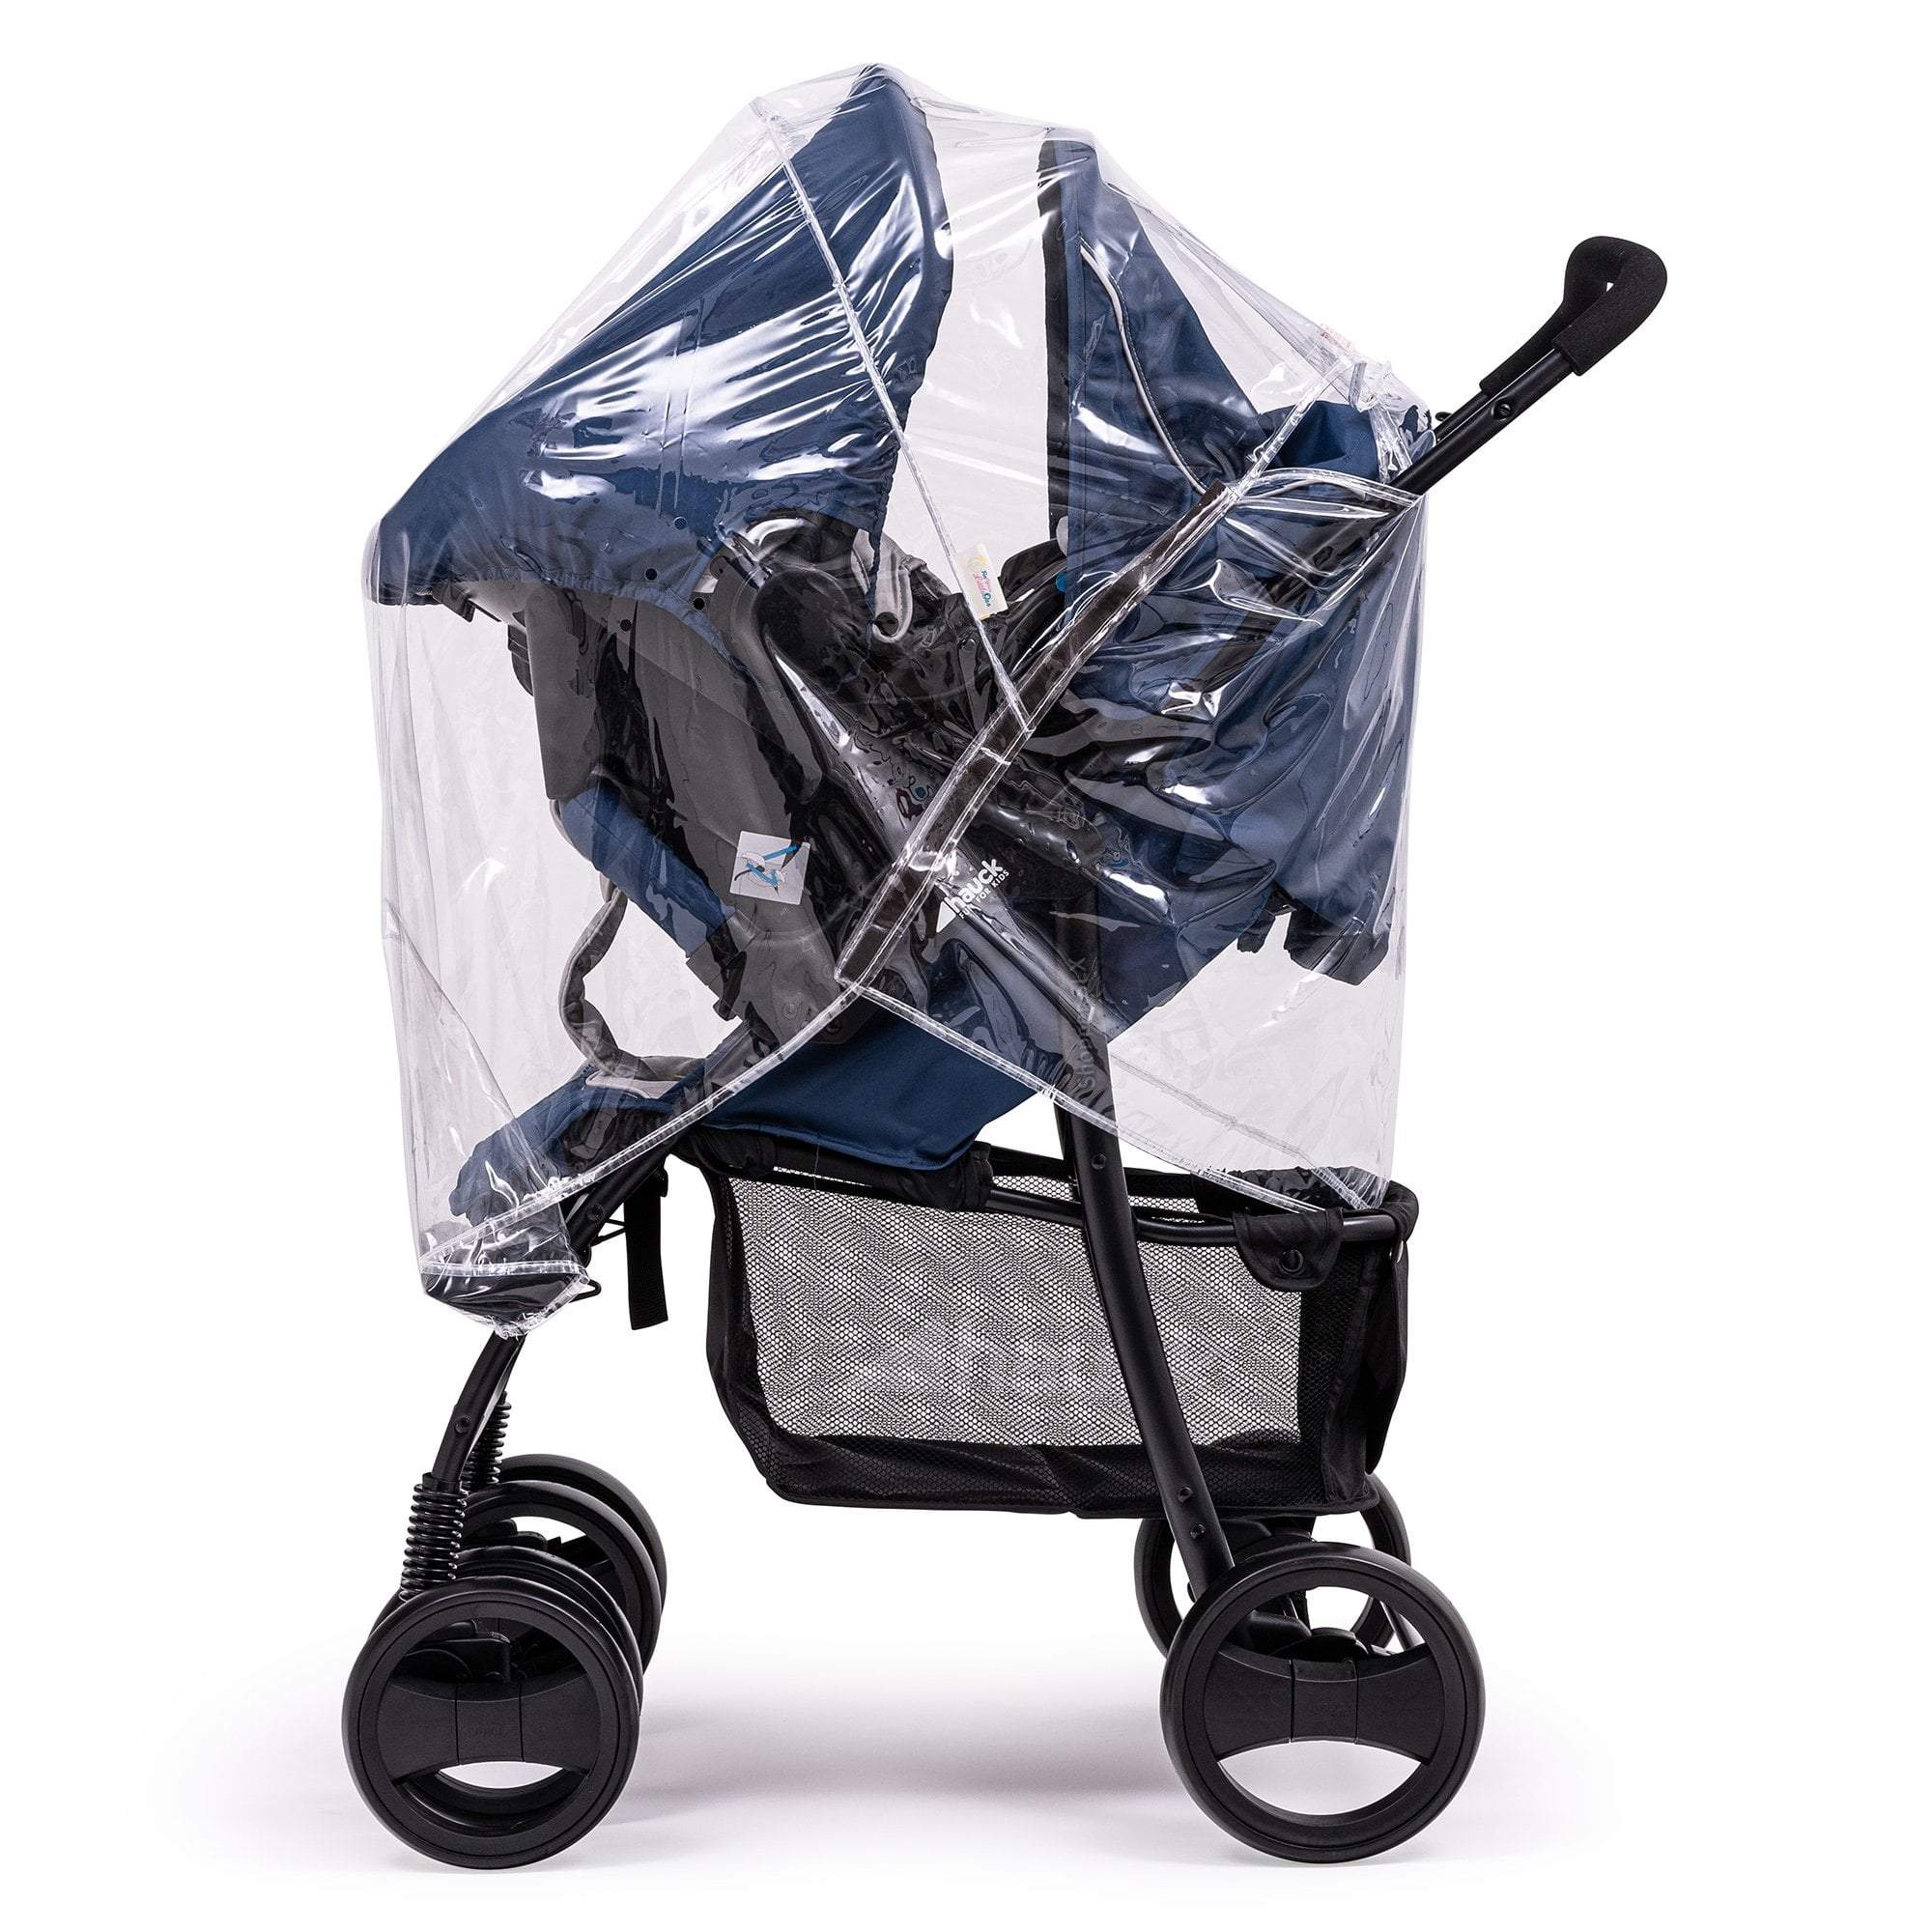 Travel System Raincover Compatible with Brevi - Fits All Models - For Your Little One